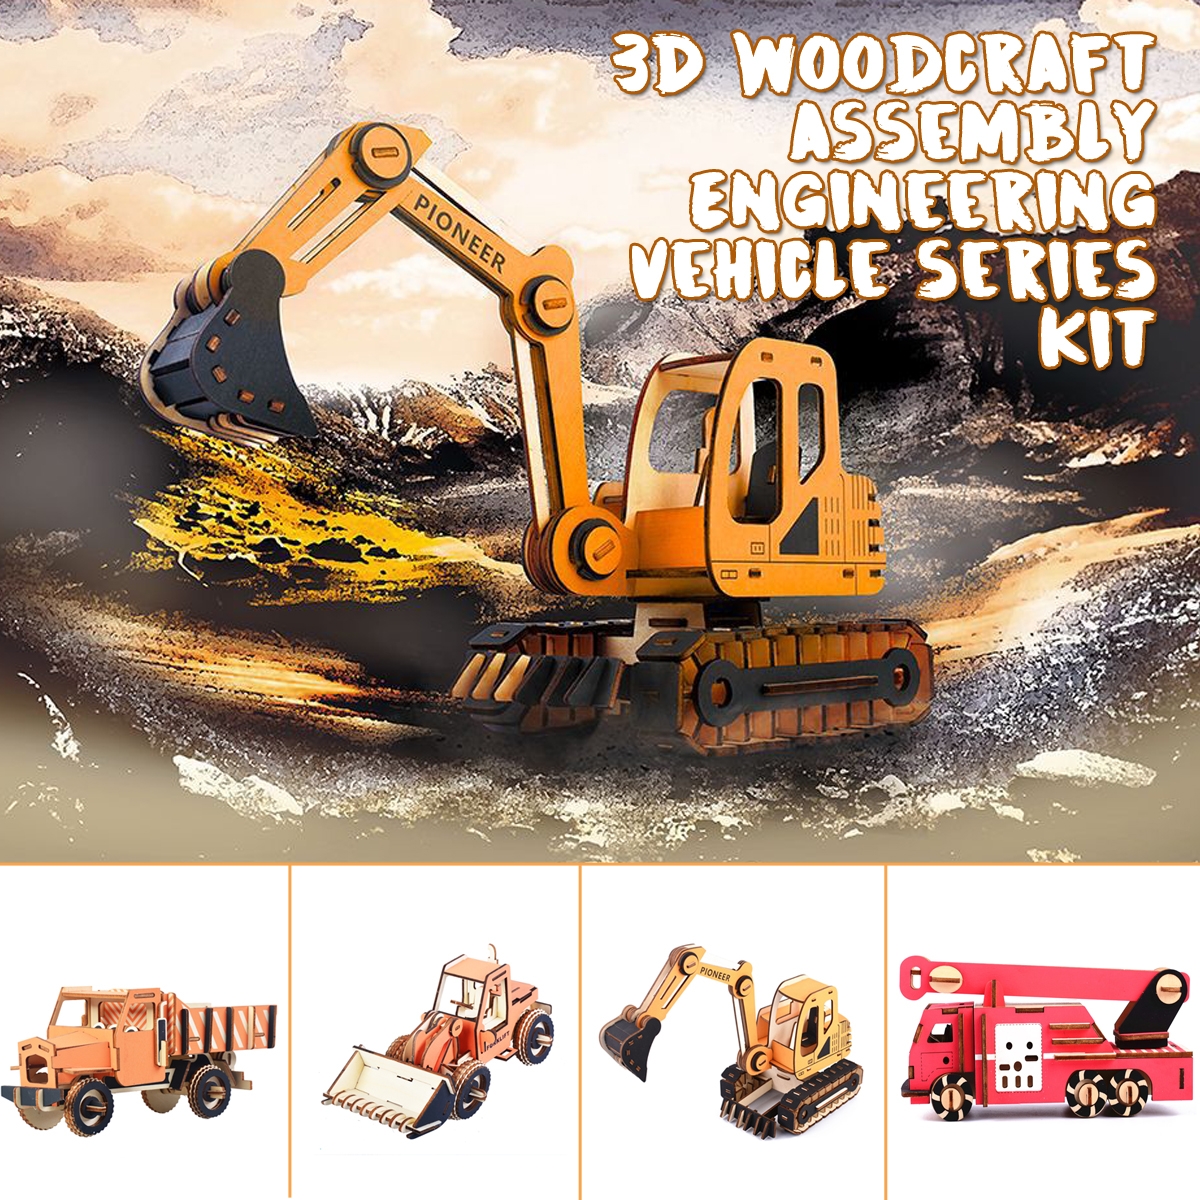 3D Woodcraft Assembly Engineering Vehicle Series Kit Jigsaw Puzzle Decoration Toy Model for Kids Gift